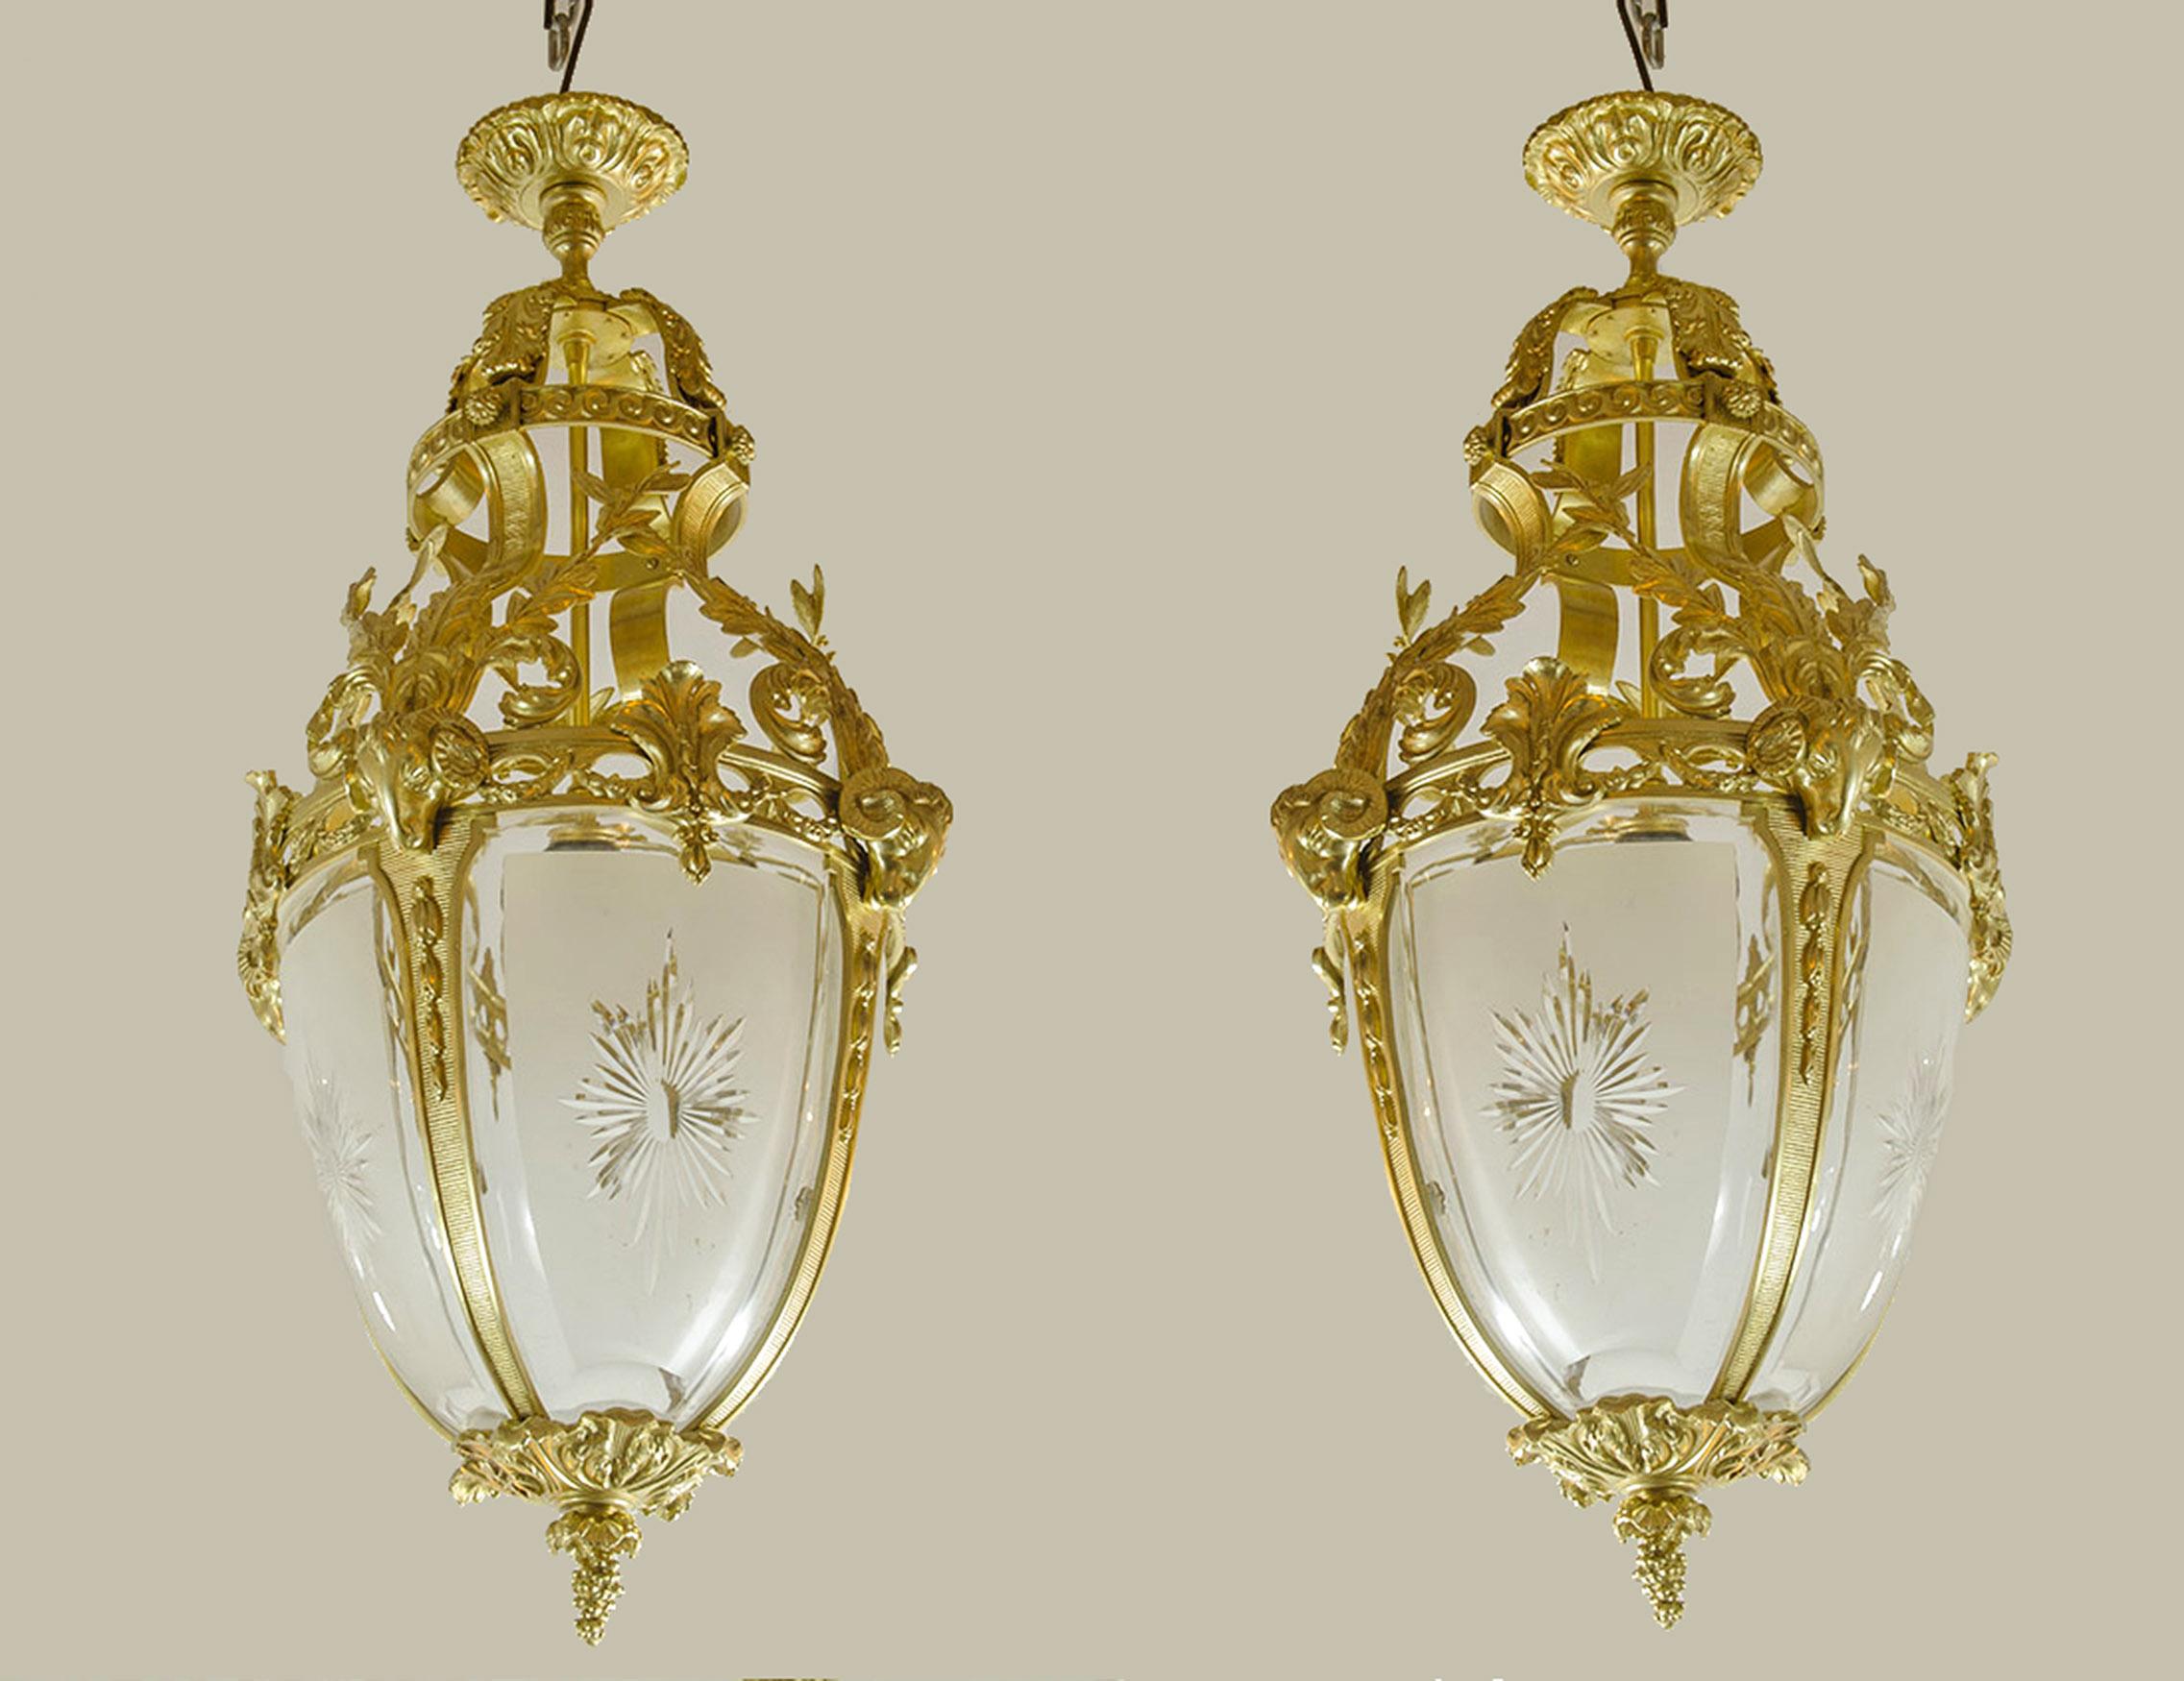 Pair of early 20th century french cast bronze and glass farole-like ceiling lamps

By: unknown
Material: bronze, glass, copper, metal
Technique: cast, gilt, metalwork, molded, polished
Dimensions: 13 in x 32 in
Date: early 20th century, circa